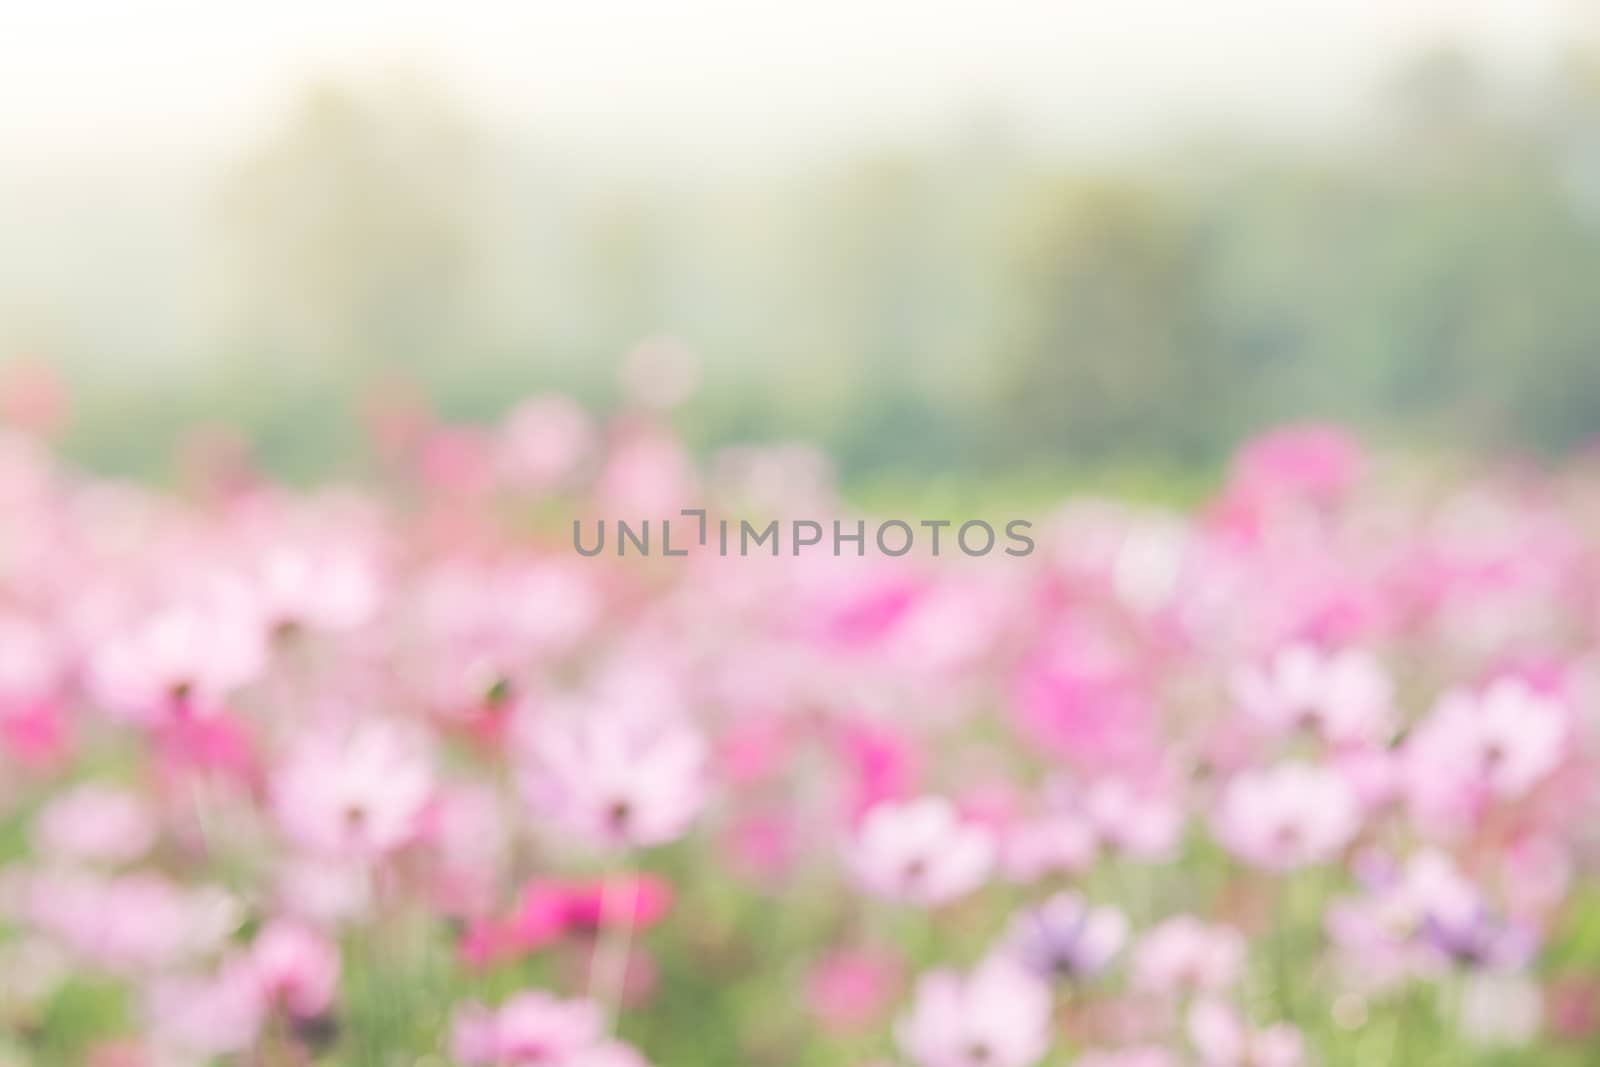 Blurry flower for background by yuiyuize